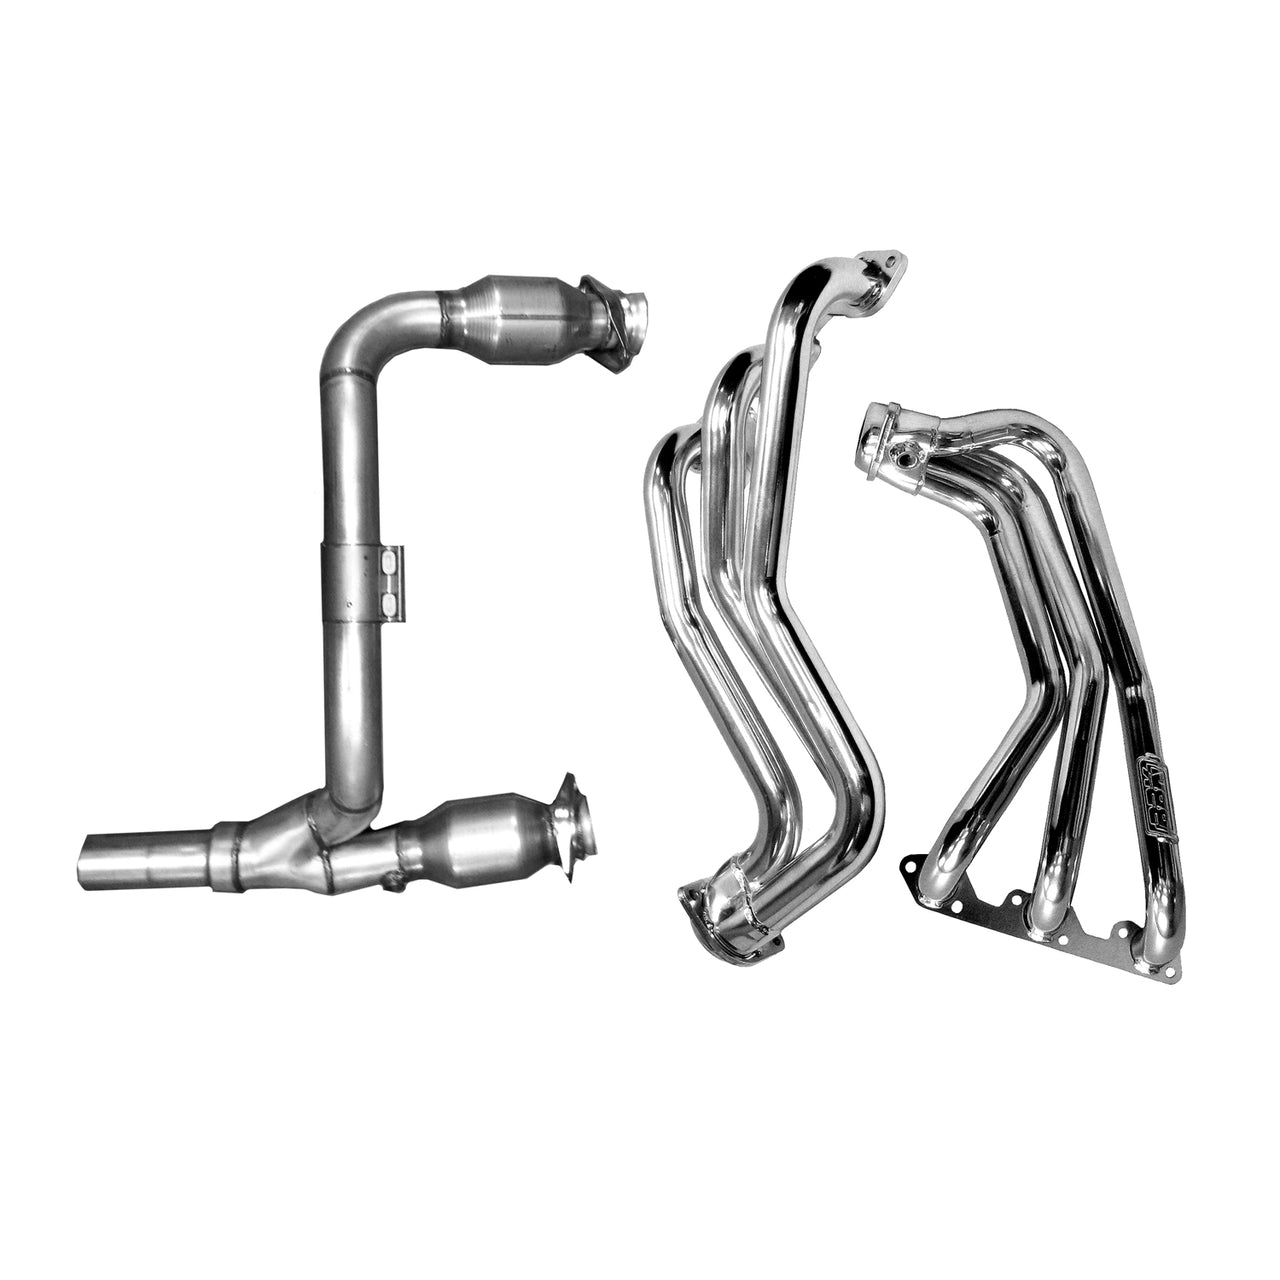 2007-2011 JEEP WRANGLER 3.8L 1-5/8 LONG TUBE HEADERS W/CATS Y PIPE (POLISHED SILVER CERAMIC)